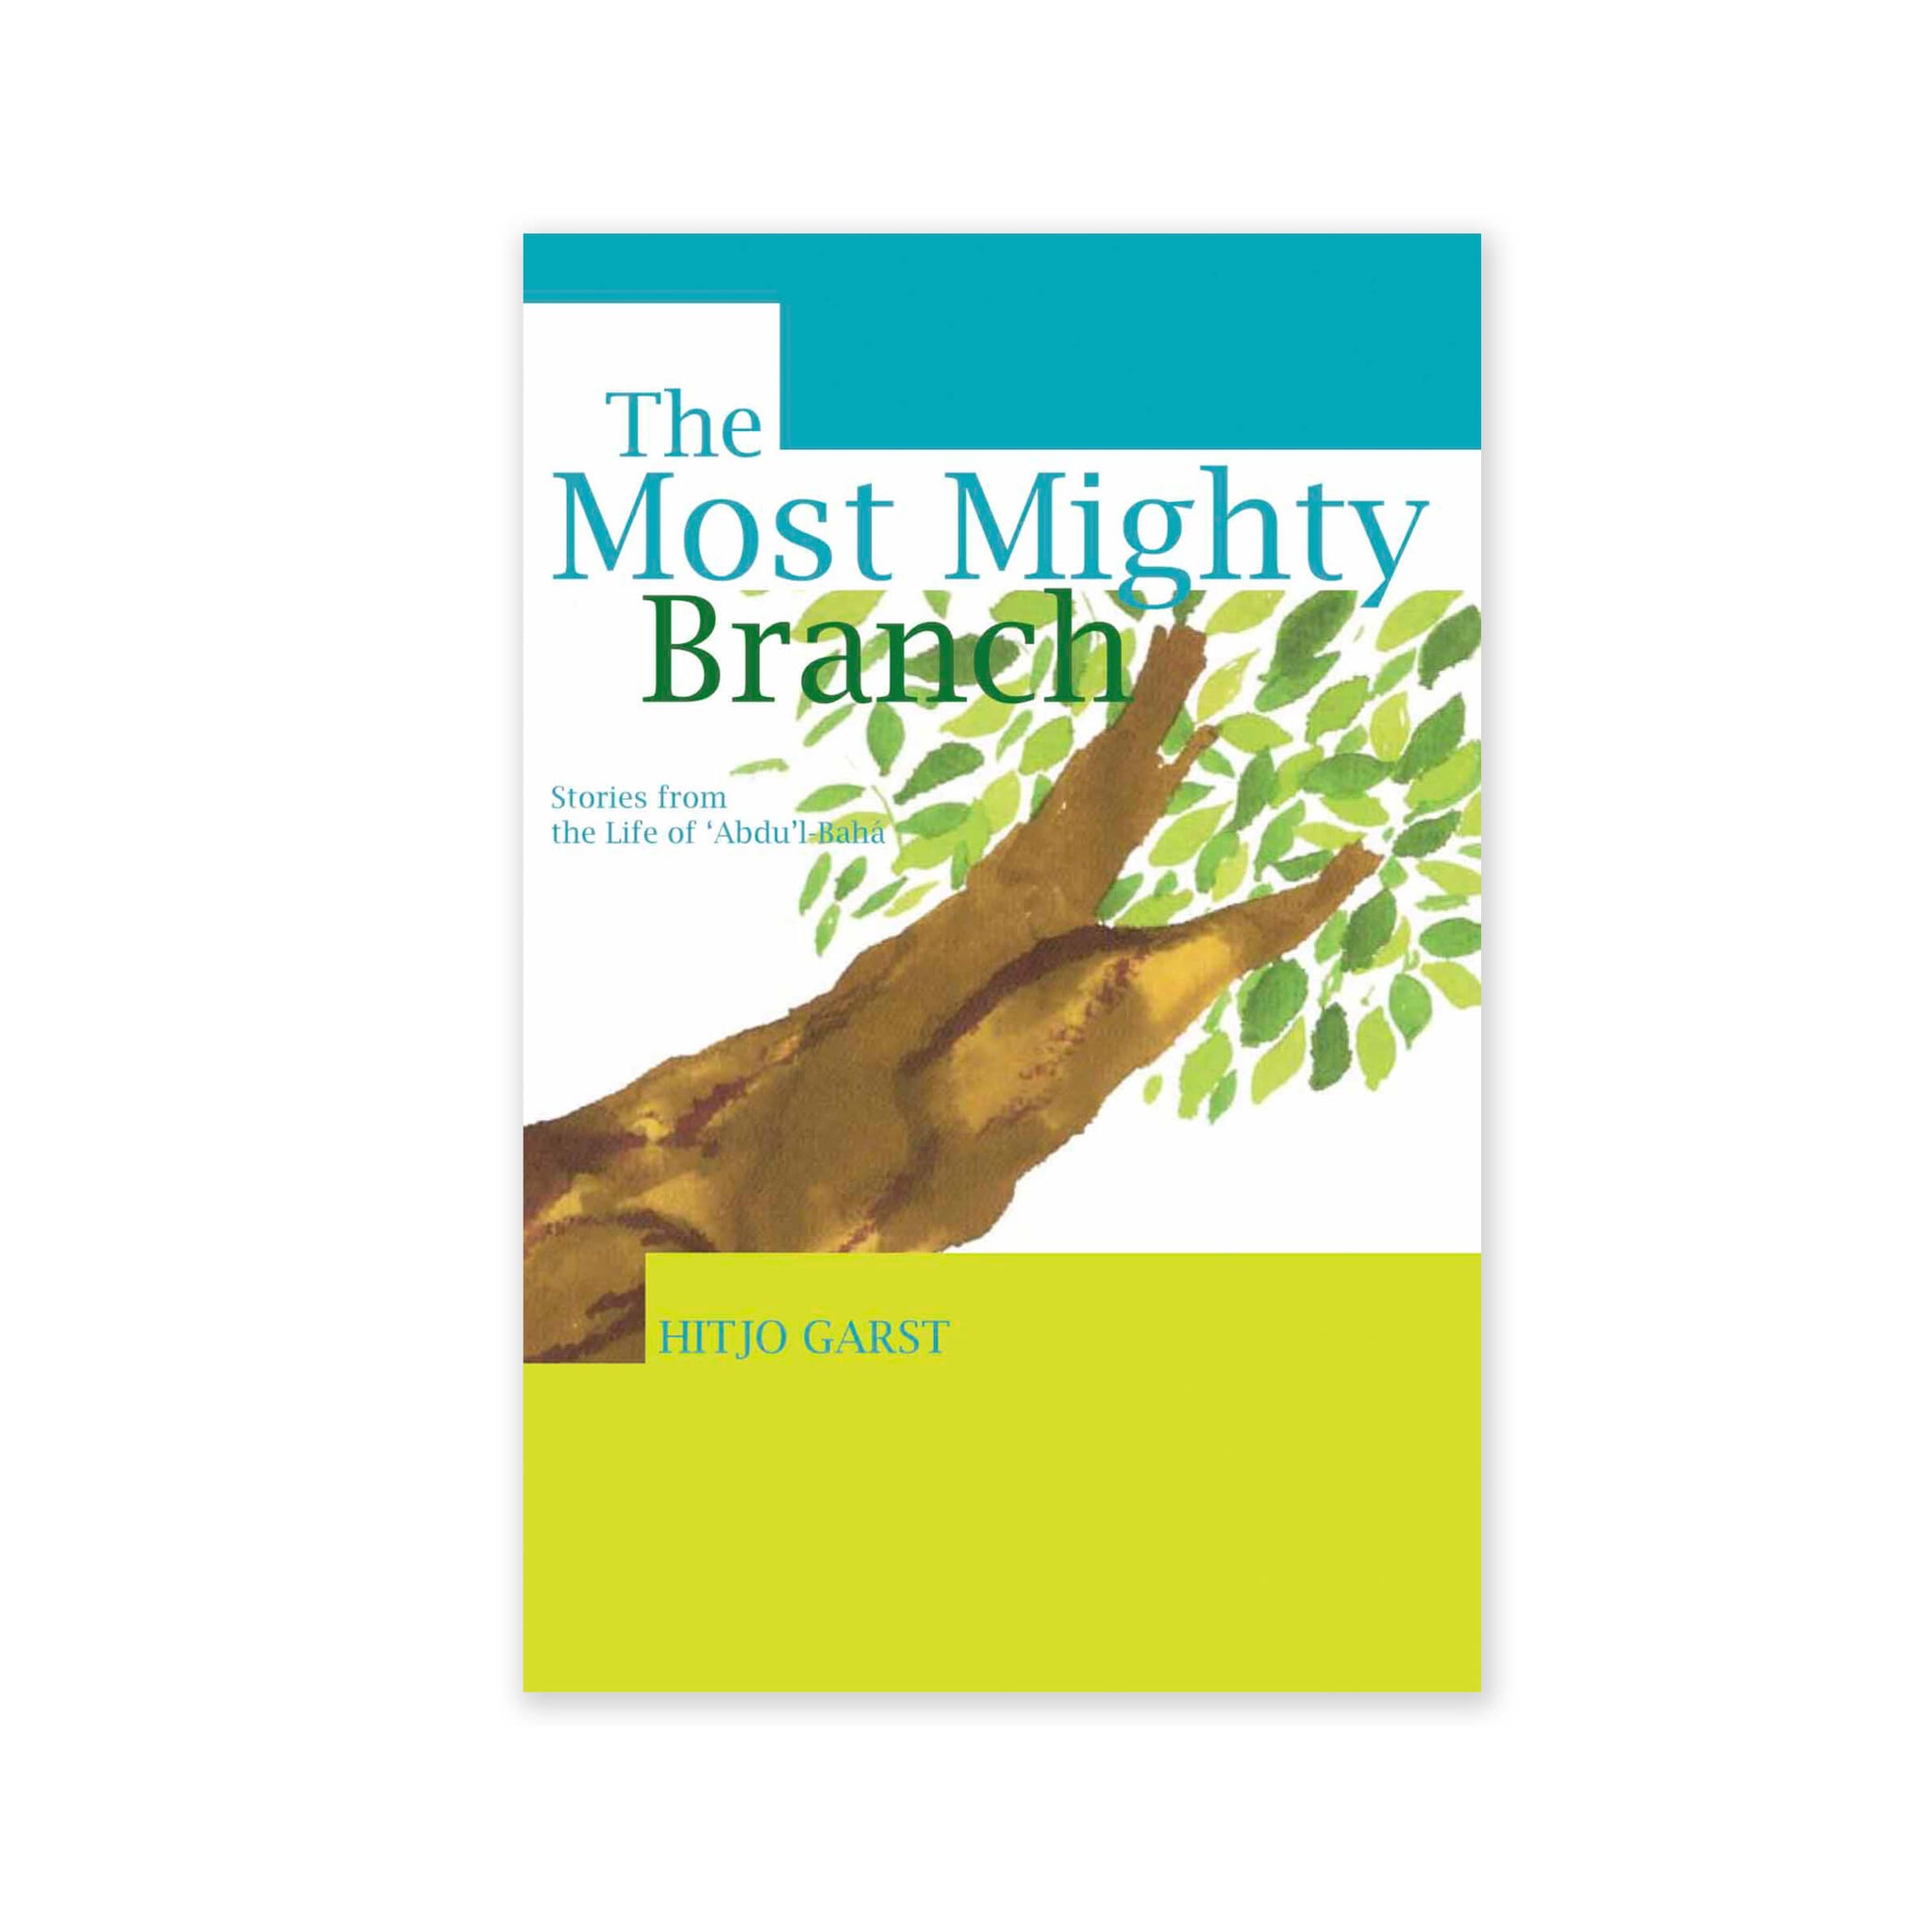 Most Mighty Branch - Stories from the Life of Abdu’l-Baha